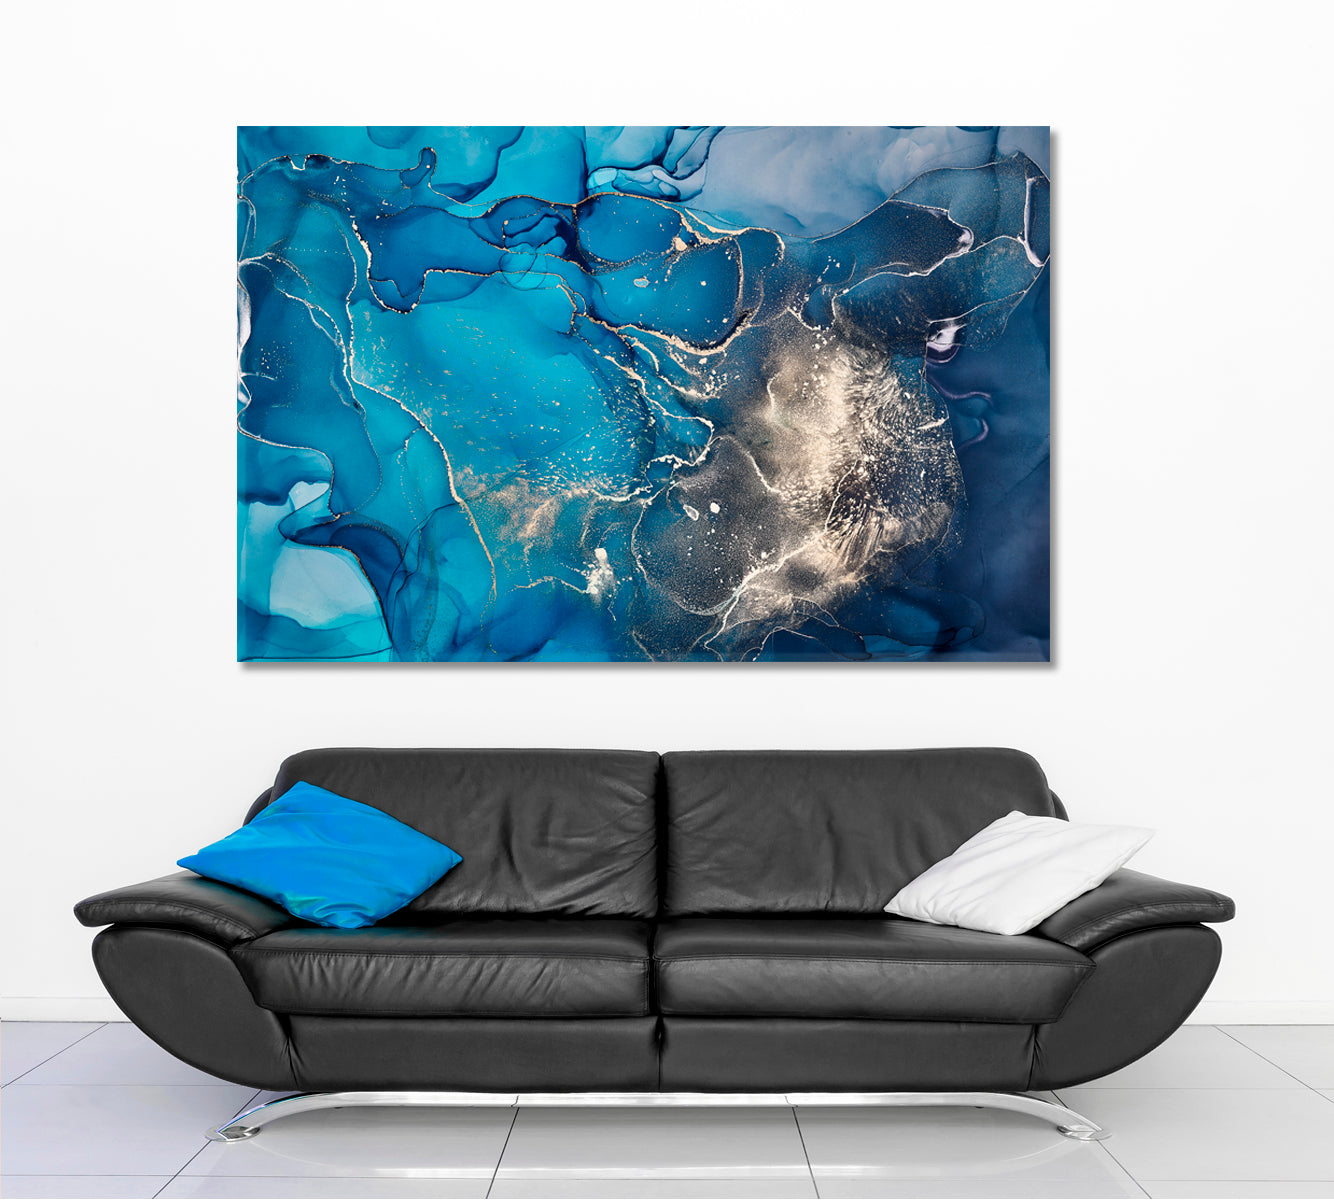 BLUE SKY Abstract Design Ink Colors Translucent Marble Fluid Art, Oriental Marbling Canvas Print Artesty 1 panel 24" x 16" 